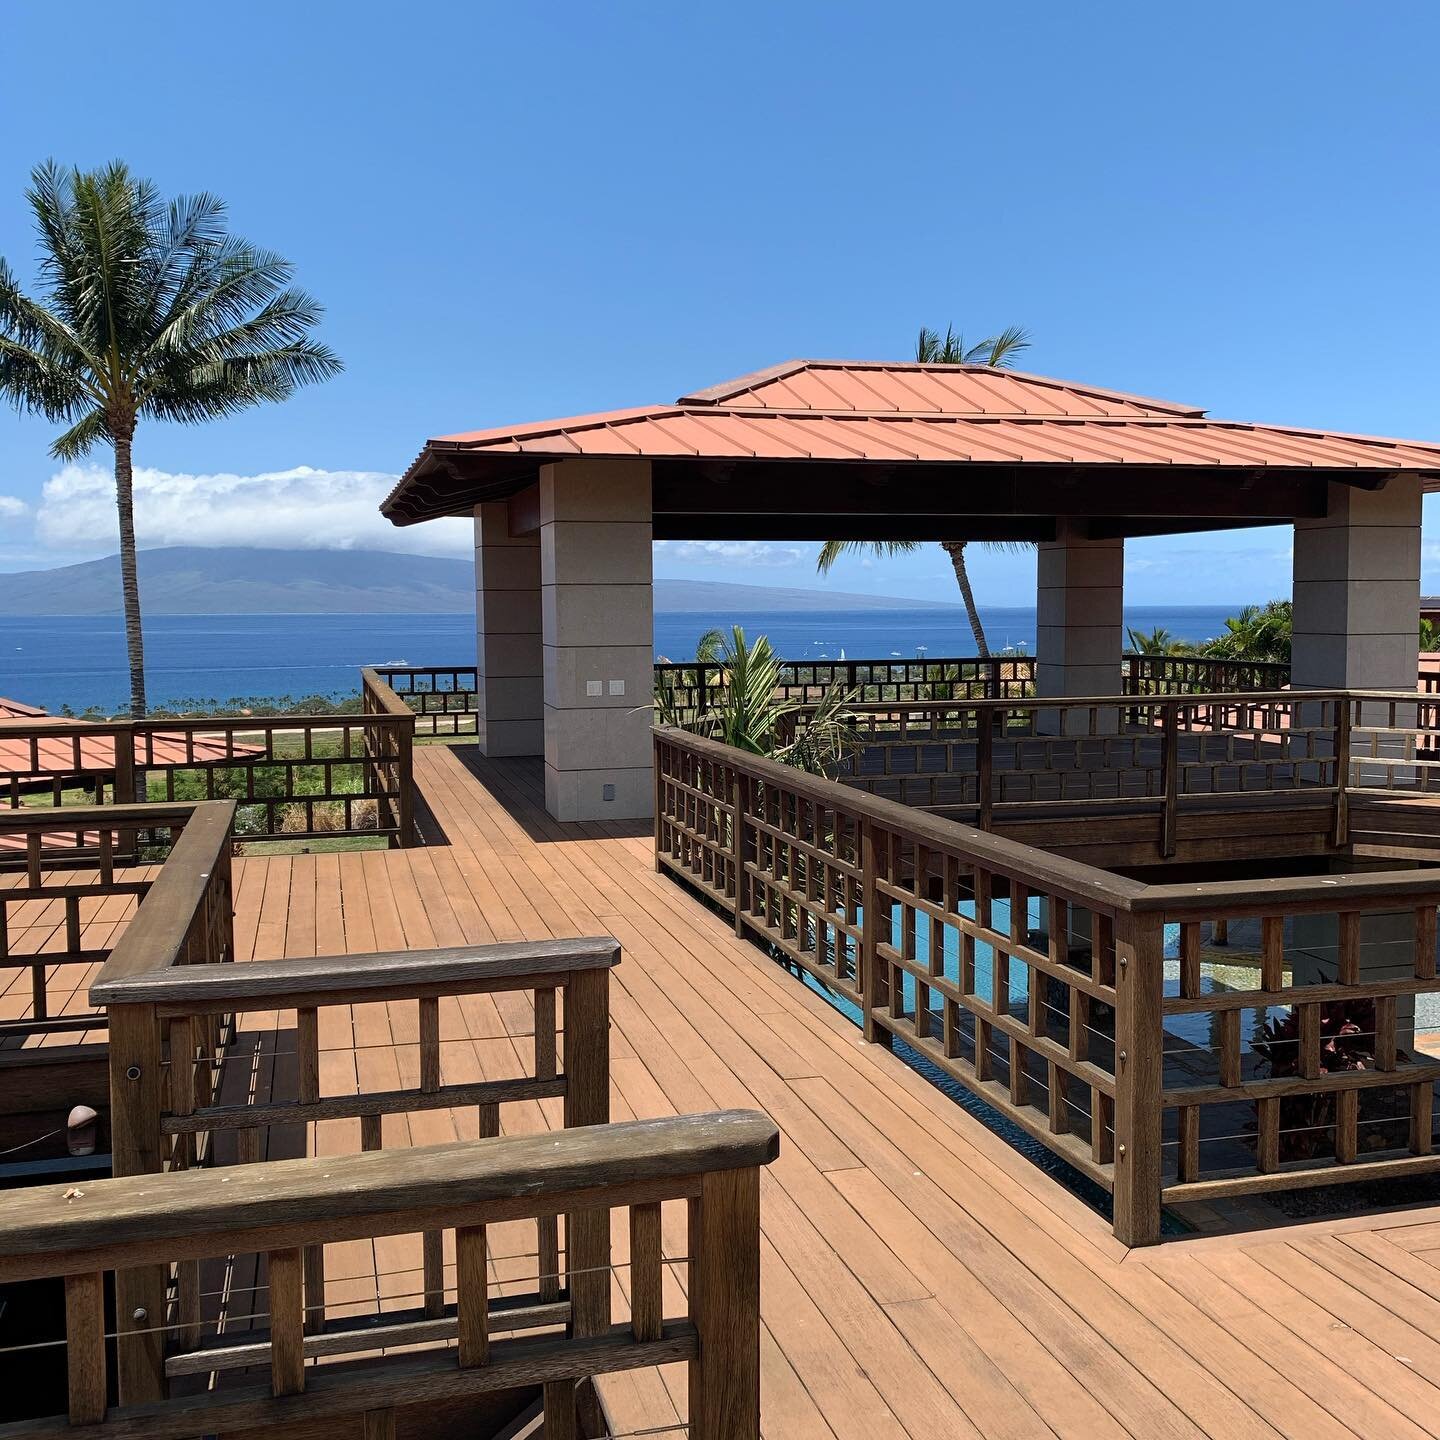 Observation deck at 55 N. Lauhoe Place. Enjoy tri-island views, boats heading in and out of the Lahaina Harbor, whales in season and the Milky Way after dark. 
.
.
.
.
Copy and paste or click the link in my bio for more information.
.
.
.
.
https://m